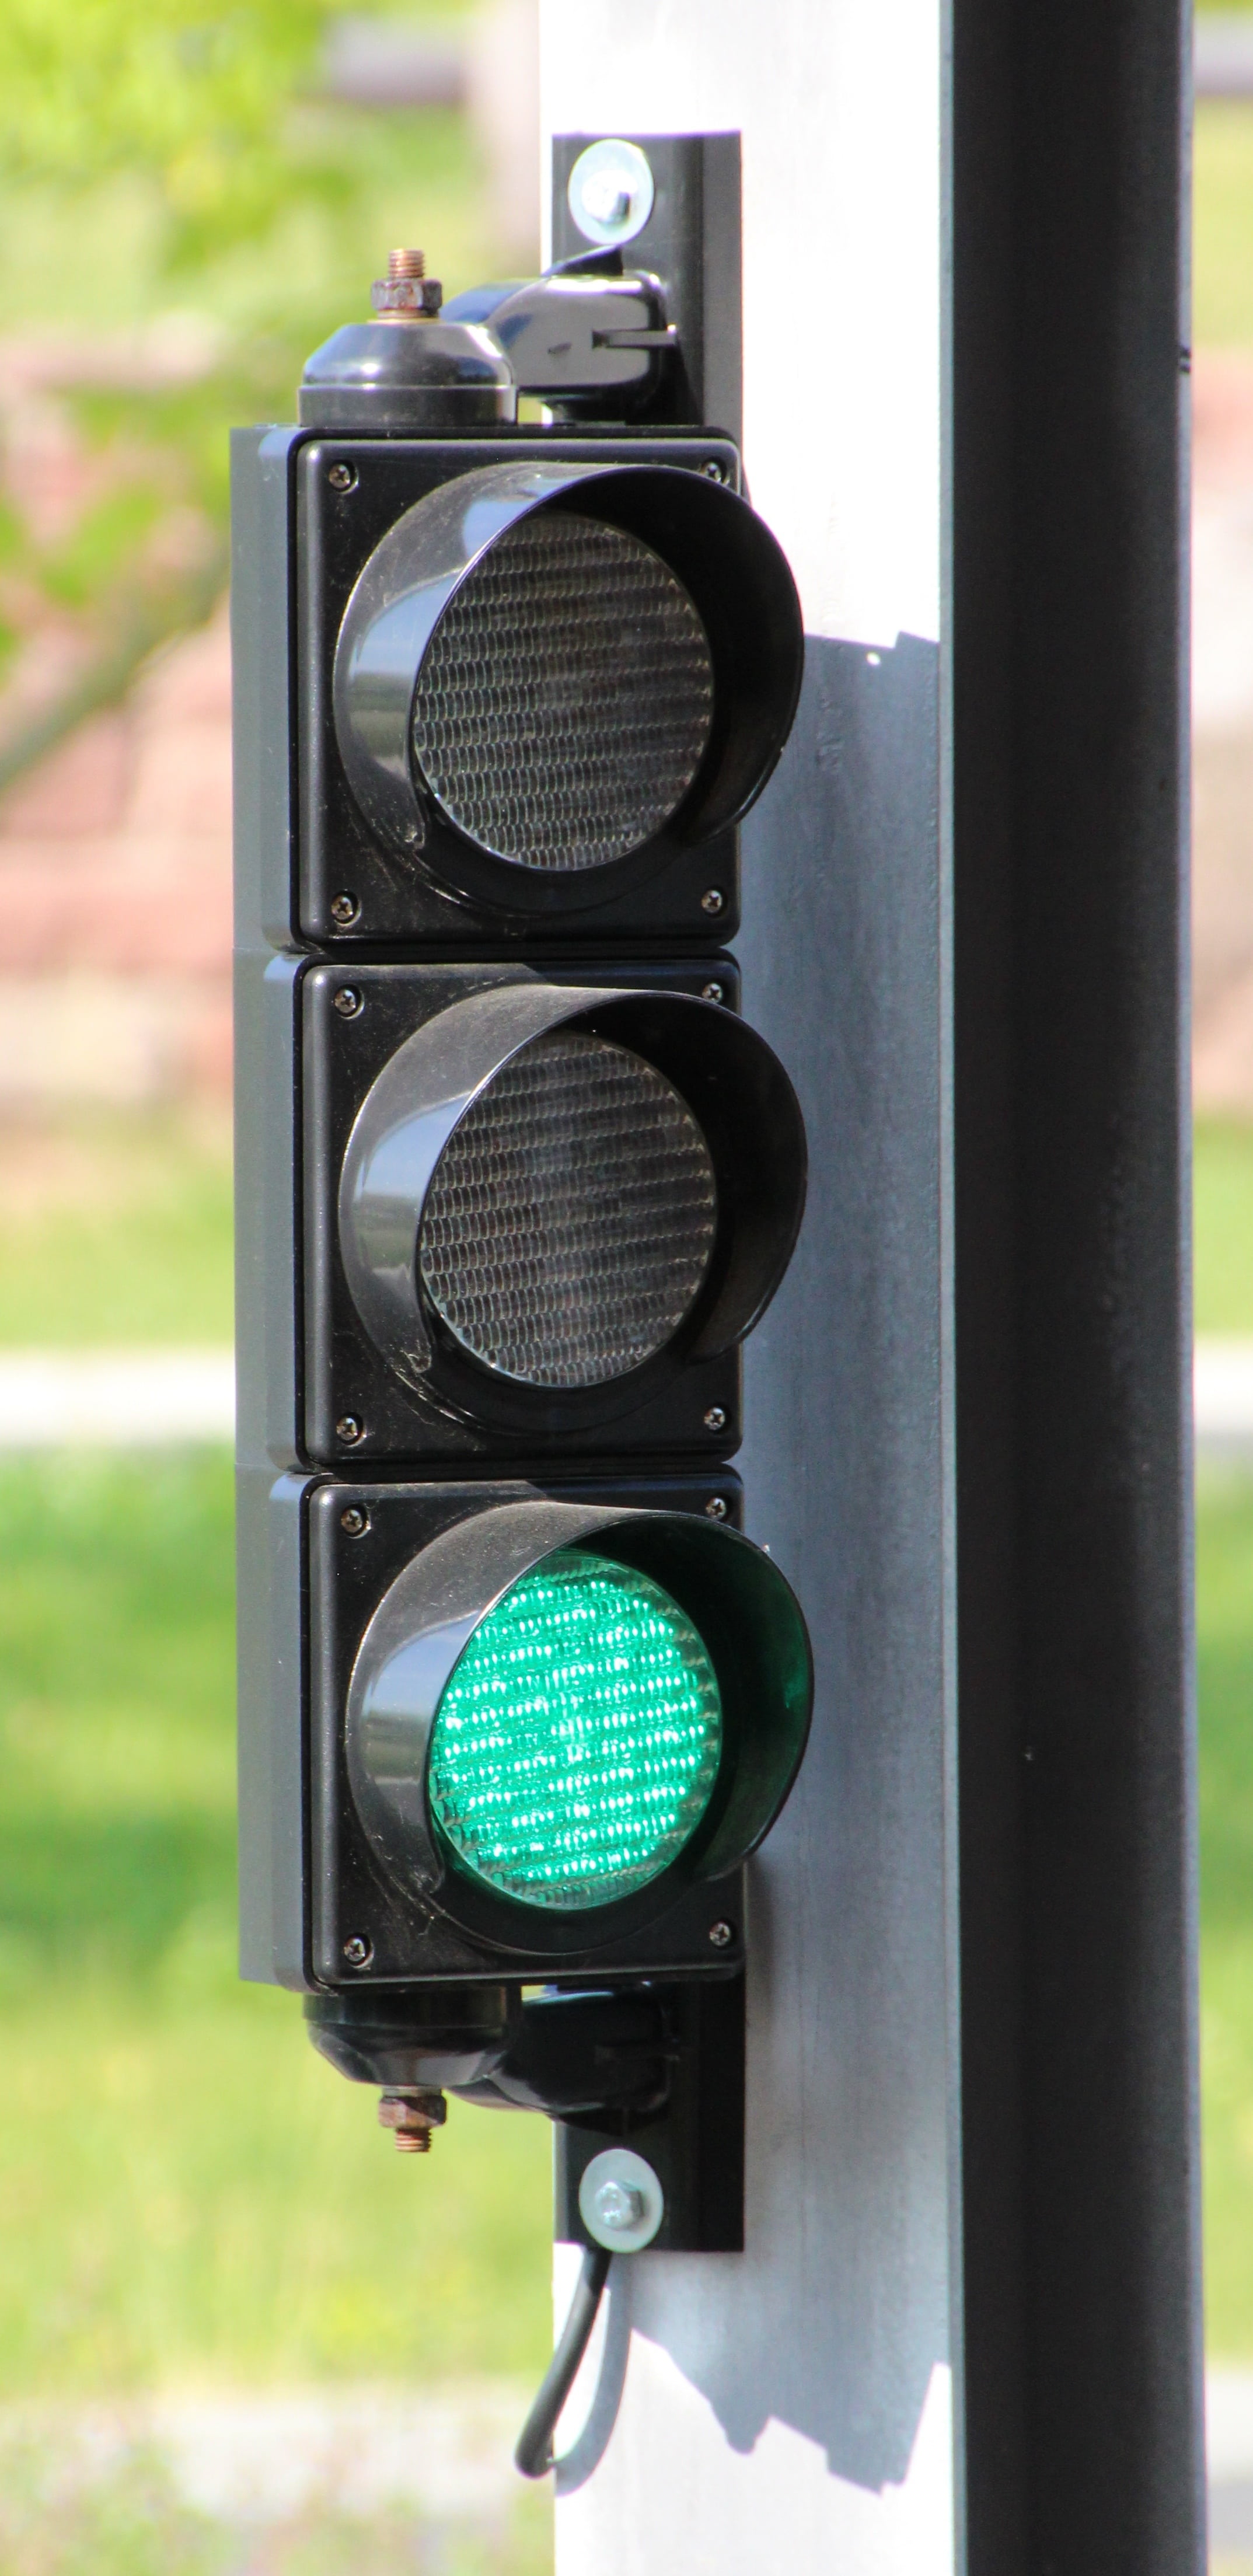 Vertical stop light with green illuminated at the bottom